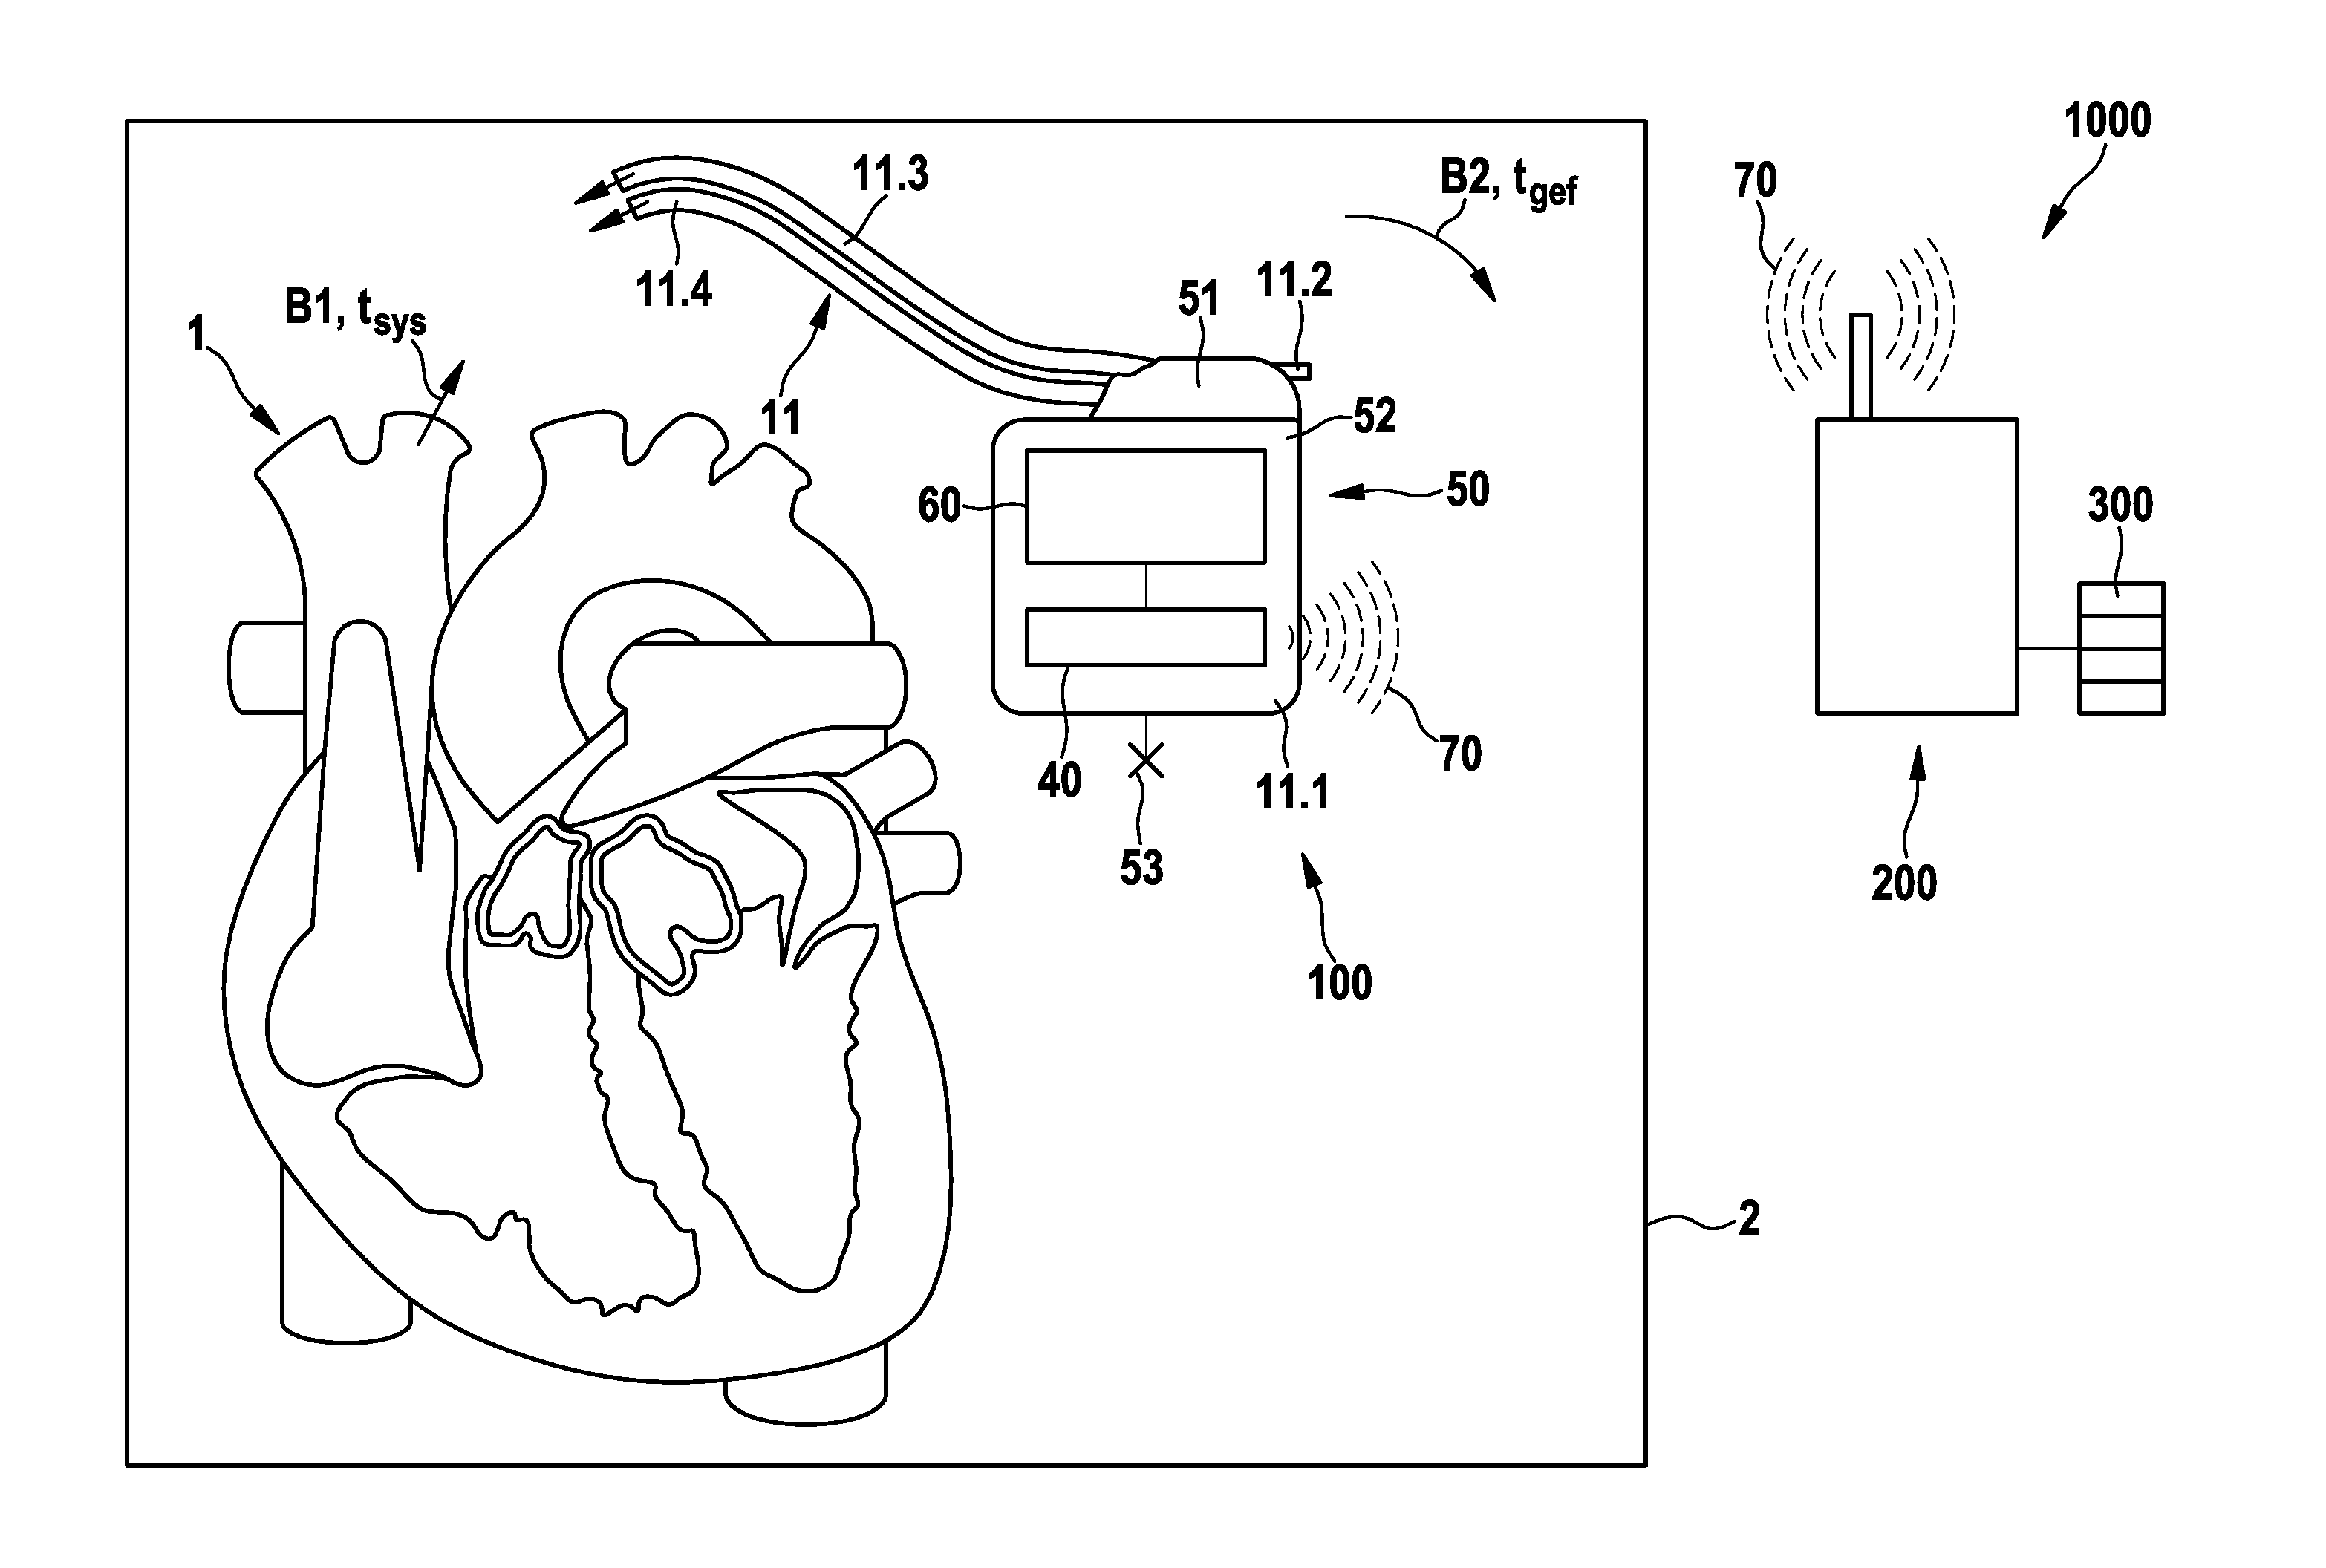 Electromedical implant and monitoring system including the electromedical implant